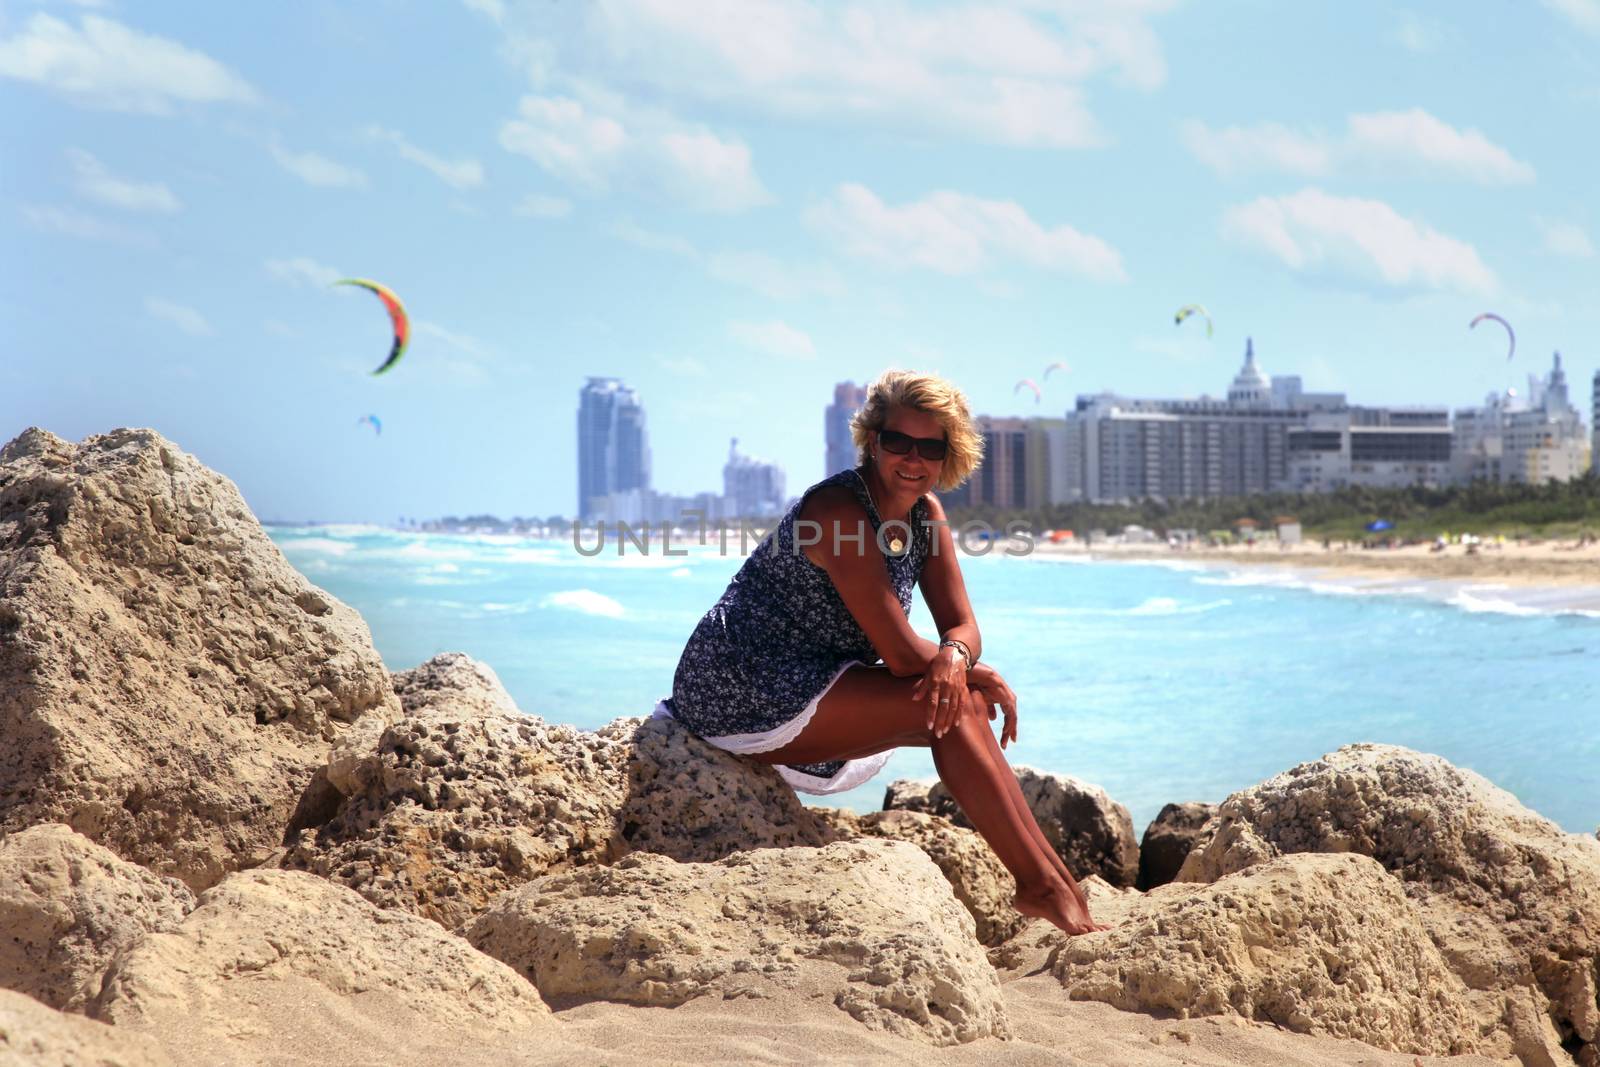 The girl sits on a stone against the backdrop of Miami Beach